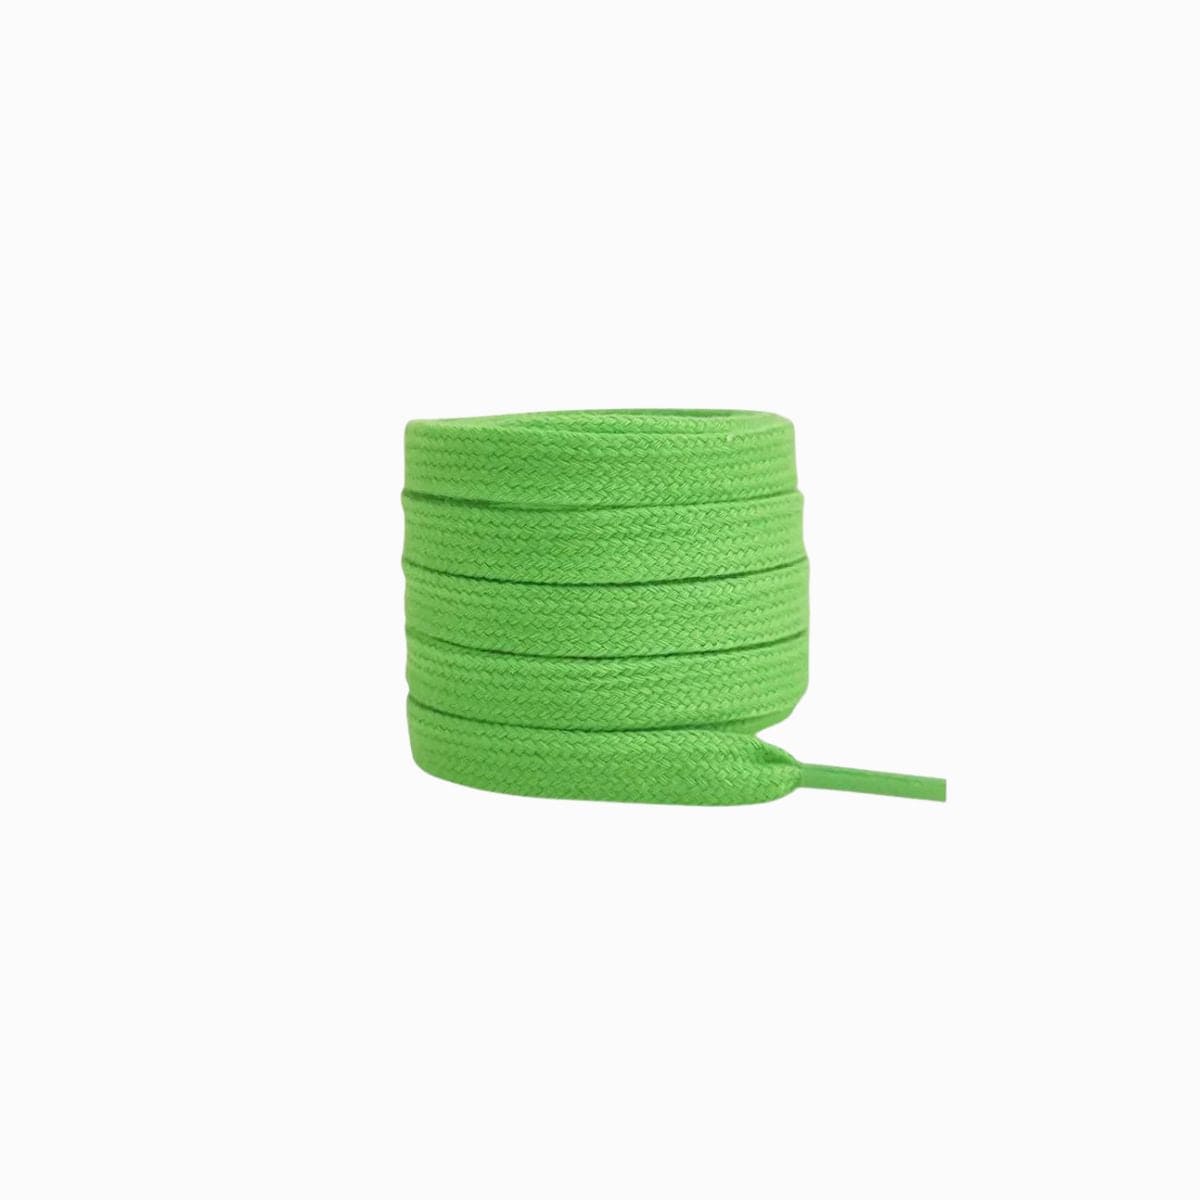 Green Replacement Shoe Laces for Adidas Samba Sneakers by Kicks Shoelaces